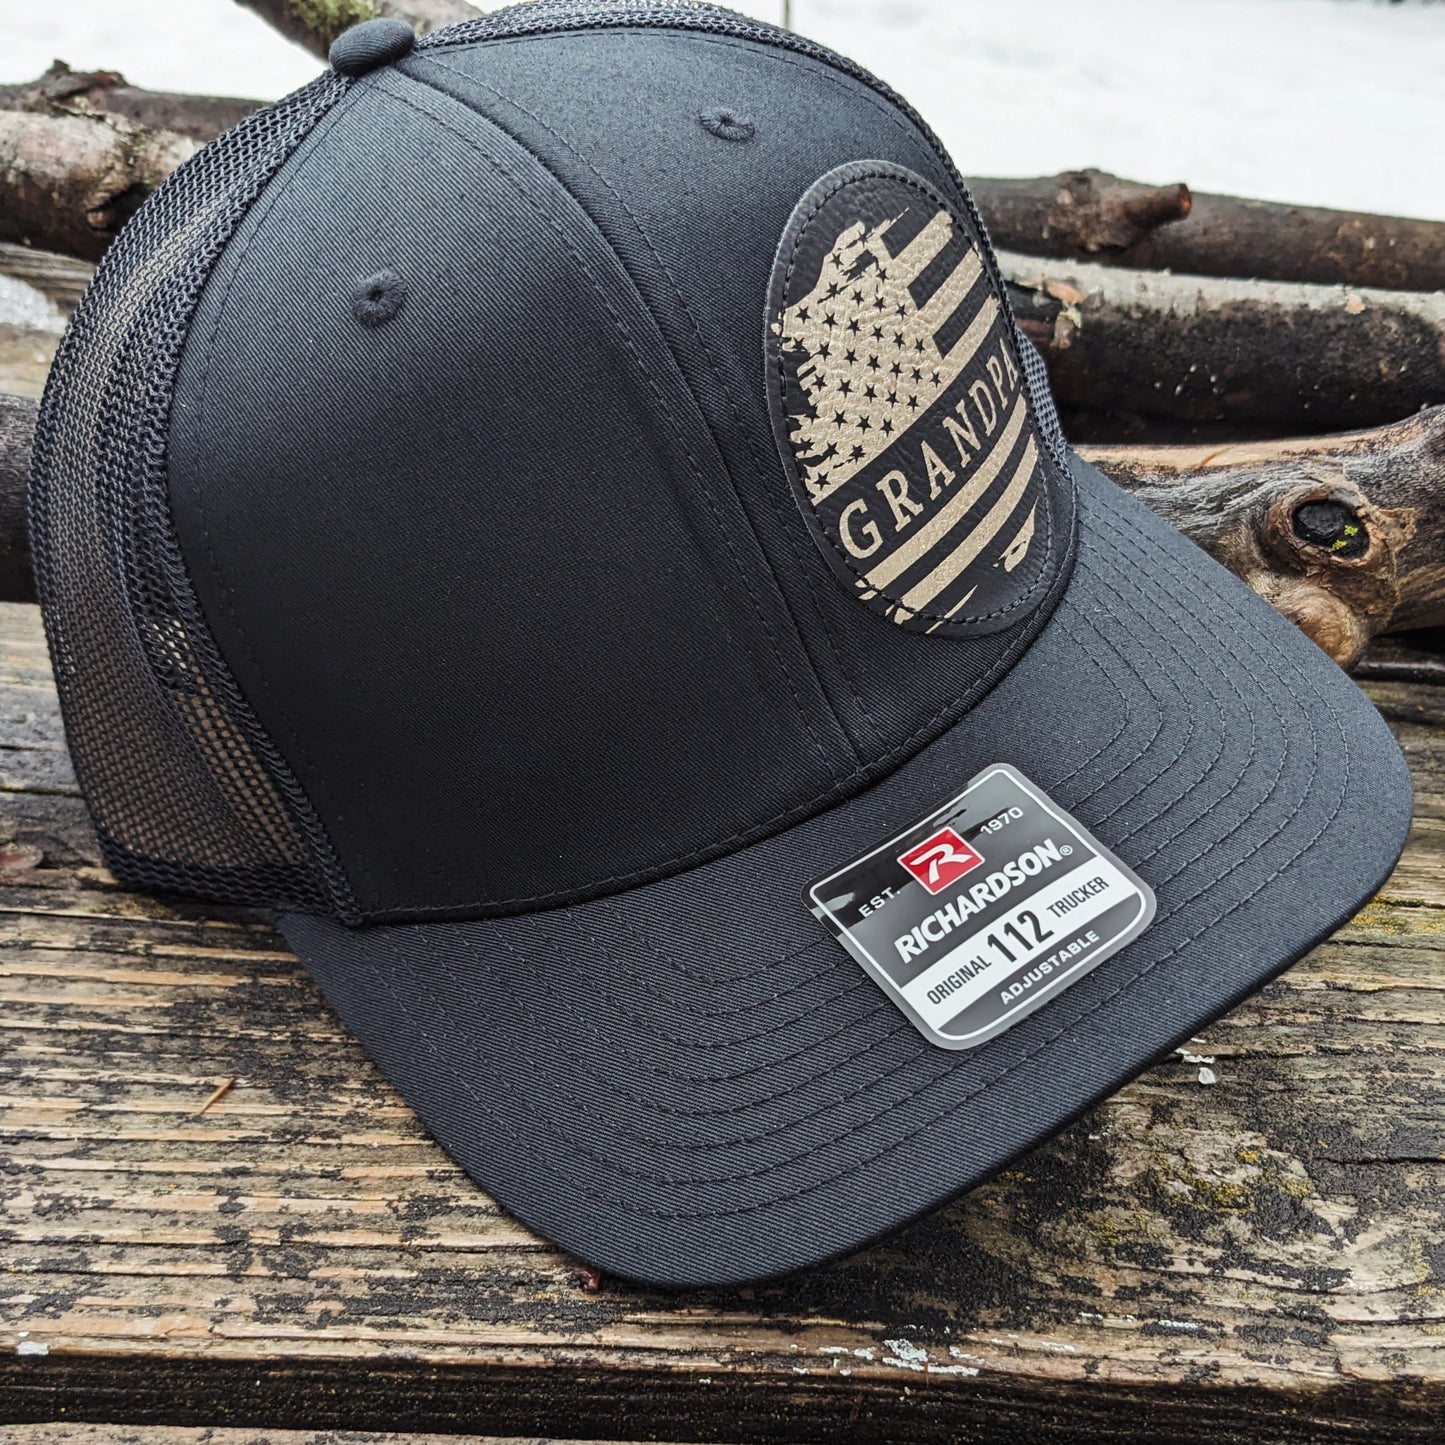 Personalized American Hat - All Black Snapback Hat